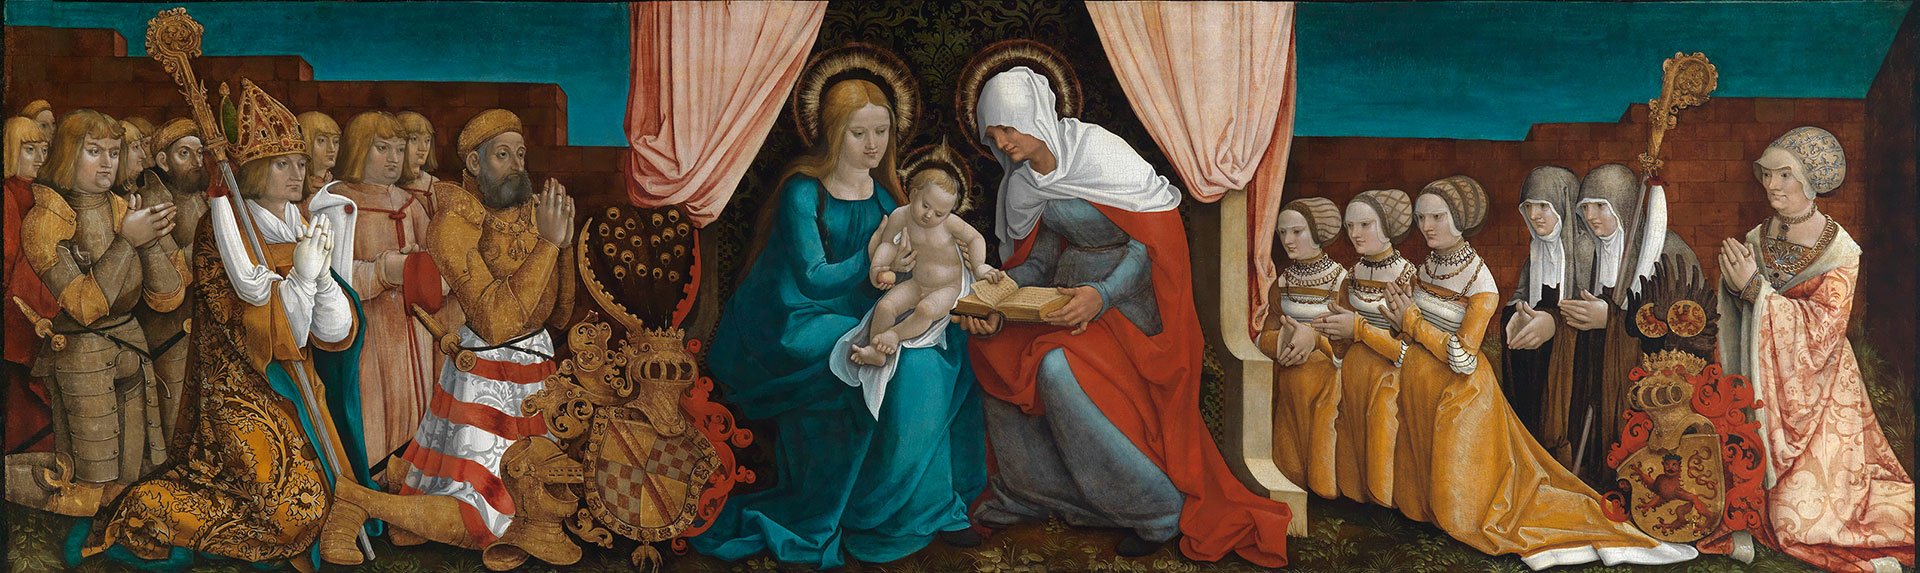 Image of the Margrave Table by the artist Hans Baldung Grien. It shows the Holy Family in the middle. On the right a group of women. On the left the Margrave's family. The work of art is located in the Kunsthalle Karlsruhe.